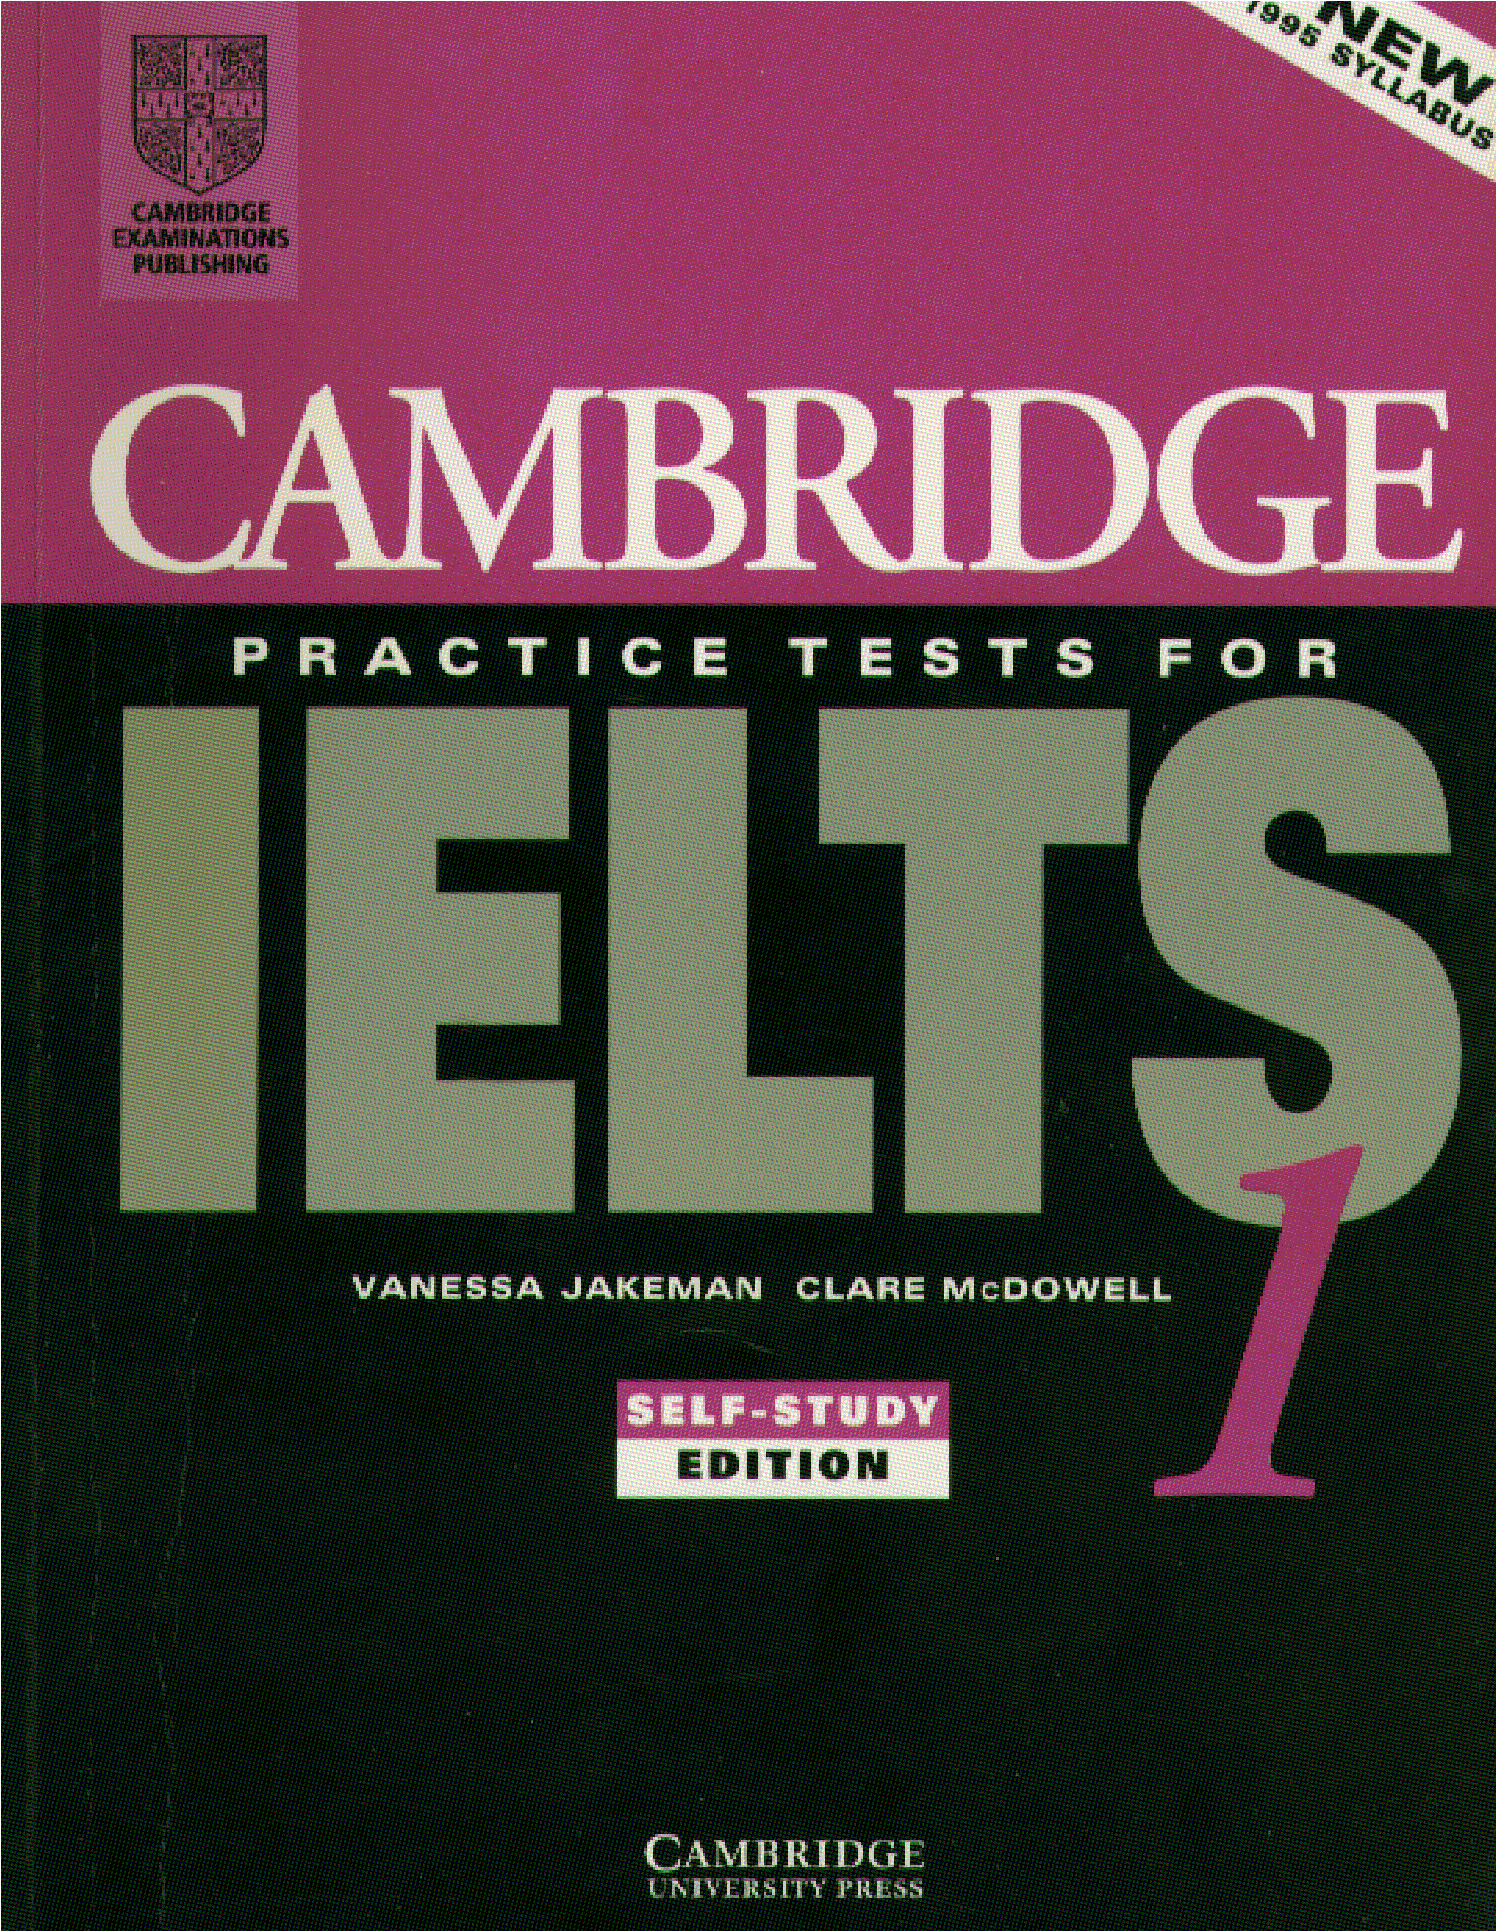 English audio tests. IELTS Test Practice book Test 1. Cambridge Practice Tests for IELTS 1. Cambridge IELTS book 1. Cambridge IELTS 1 Test pdf book.